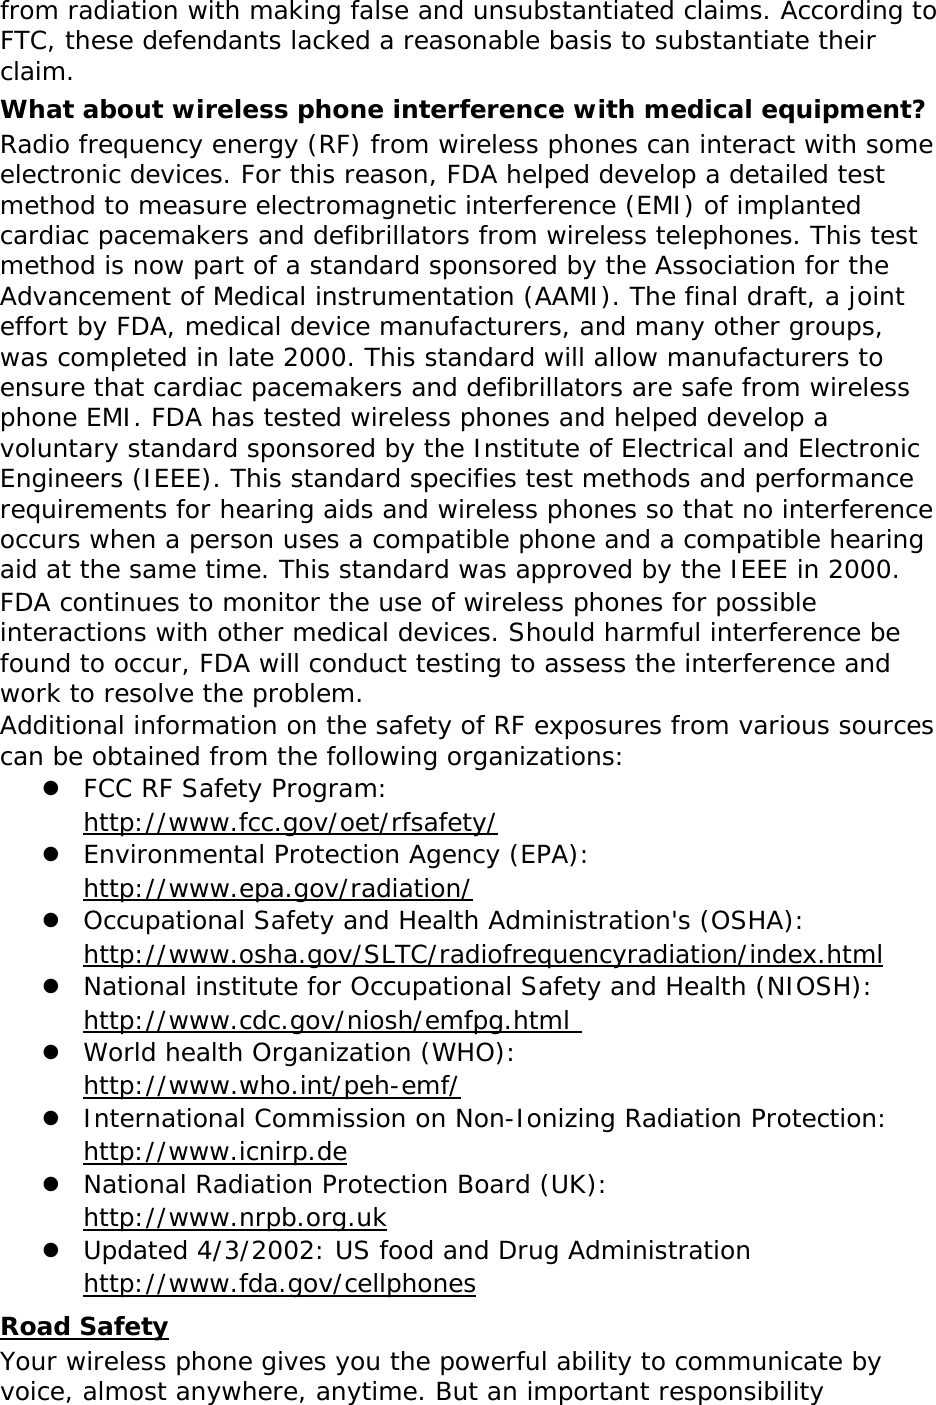   from radiation with making false and unsubstantiated claims. According to FTC, these defendants lacked a reasonable basis to substantiate their claim. What about wireless phone interference with medical equipment? Radio frequency energy (RF) from wireless phones can interact with some electronic devices. For this reason, FDA helped develop a detailed test method to measure electromagnetic interference (EMI) of implanted cardiac pacemakers and defibrillators from wireless telephones. This test method is now part of a standard sponsored by the Association for the Advancement of Medical instrumentation (AAMI). The final draft, a joint effort by FDA, medical device manufacturers, and many other groups, was completed in late 2000. This standard will allow manufacturers to ensure that cardiac pacemakers and defibrillators are safe from wireless phone EMI. FDA has tested wireless phones and helped develop a voluntary standard sponsored by the Institute of Electrical and Electronic Engineers (IEEE). This standard specifies test methods and performance requirements for hearing aids and wireless phones so that no interference occurs when a person uses a compatible phone and a compatible hearing aid at the same time. This standard was approved by the IEEE in 2000. FDA continues to monitor the use of wireless phones for possible interactions with other medical devices. Should harmful interference be found to occur, FDA will conduct testing to assess the interference and work to resolve the problem. Additional information on the safety of RF exposures from various sources can be obtained from the following organizations:  FCC RF Safety Program:  http://www.fcc.gov/oet/rfsafety/  Environmental Protection Agency (EPA):  http://www.epa.gov/radiation/  Occupational Safety and Health Administration&apos;s (OSHA):        http://www.osha.gov/SLTC/radiofrequencyradiation/index.html  National institute for Occupational Safety and Health (NIOSH):  http://www.cdc.gov/niosh/emfpg.html   World health Organization (WHO):  http://www.who.int/peh-emf/  International Commission on Non-Ionizing Radiation Protection:  http://www.icnirp.de  National Radiation Protection Board (UK):  http://www.nrpb.org.uk  Updated 4/3/2002: US food and Drug Administration  http://www.fda.gov/cellphones Road Safety Your wireless phone gives you the powerful ability to communicate by voice, almost anywhere, anytime. But an important responsibility 